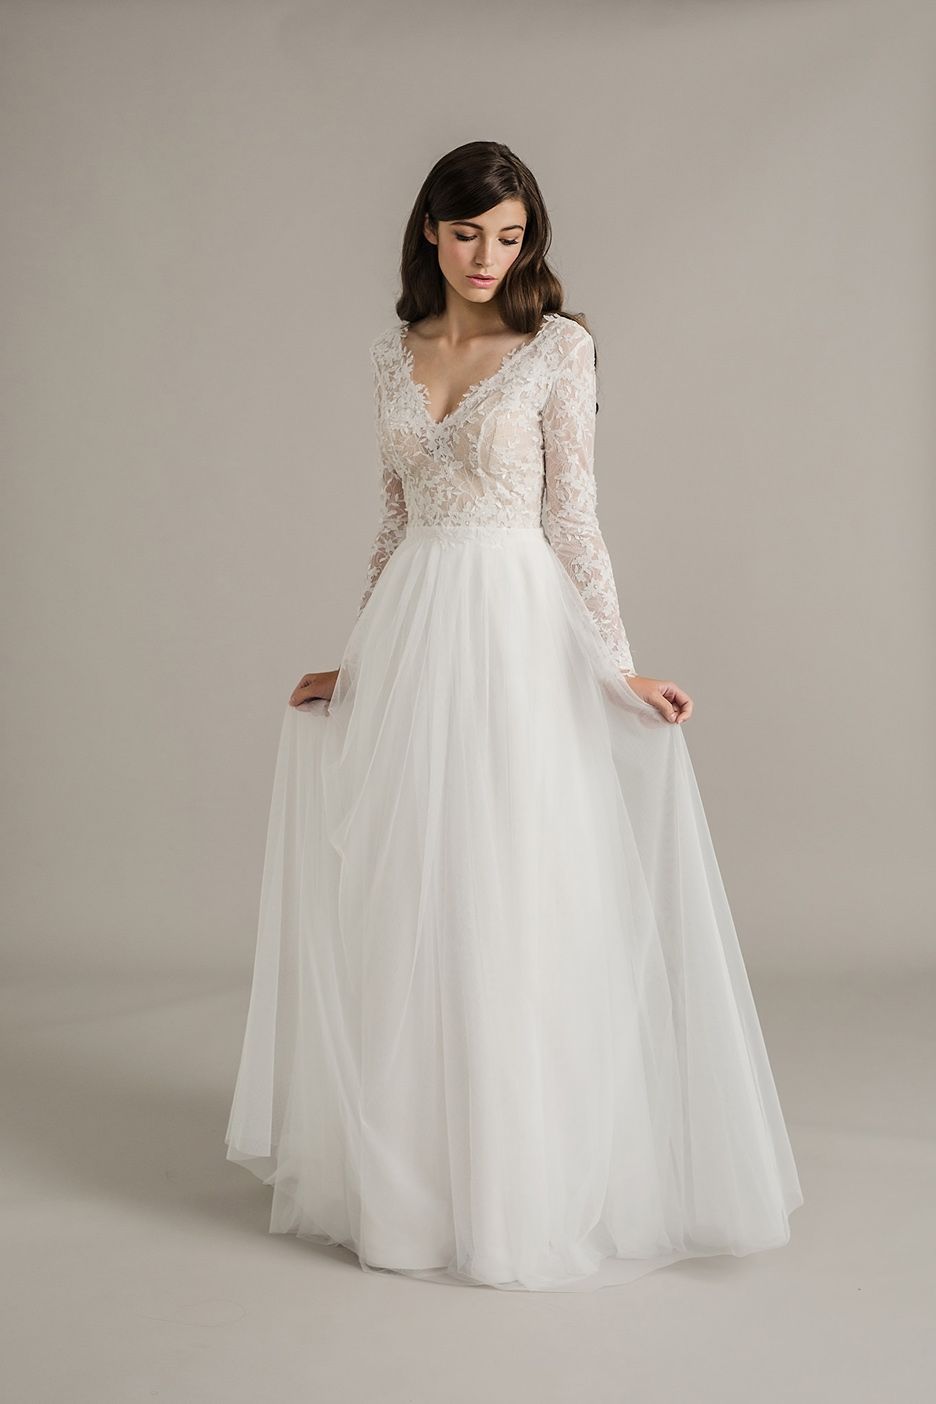 Genevieve Wedding Dress from Sally Eagle Bridals Collection